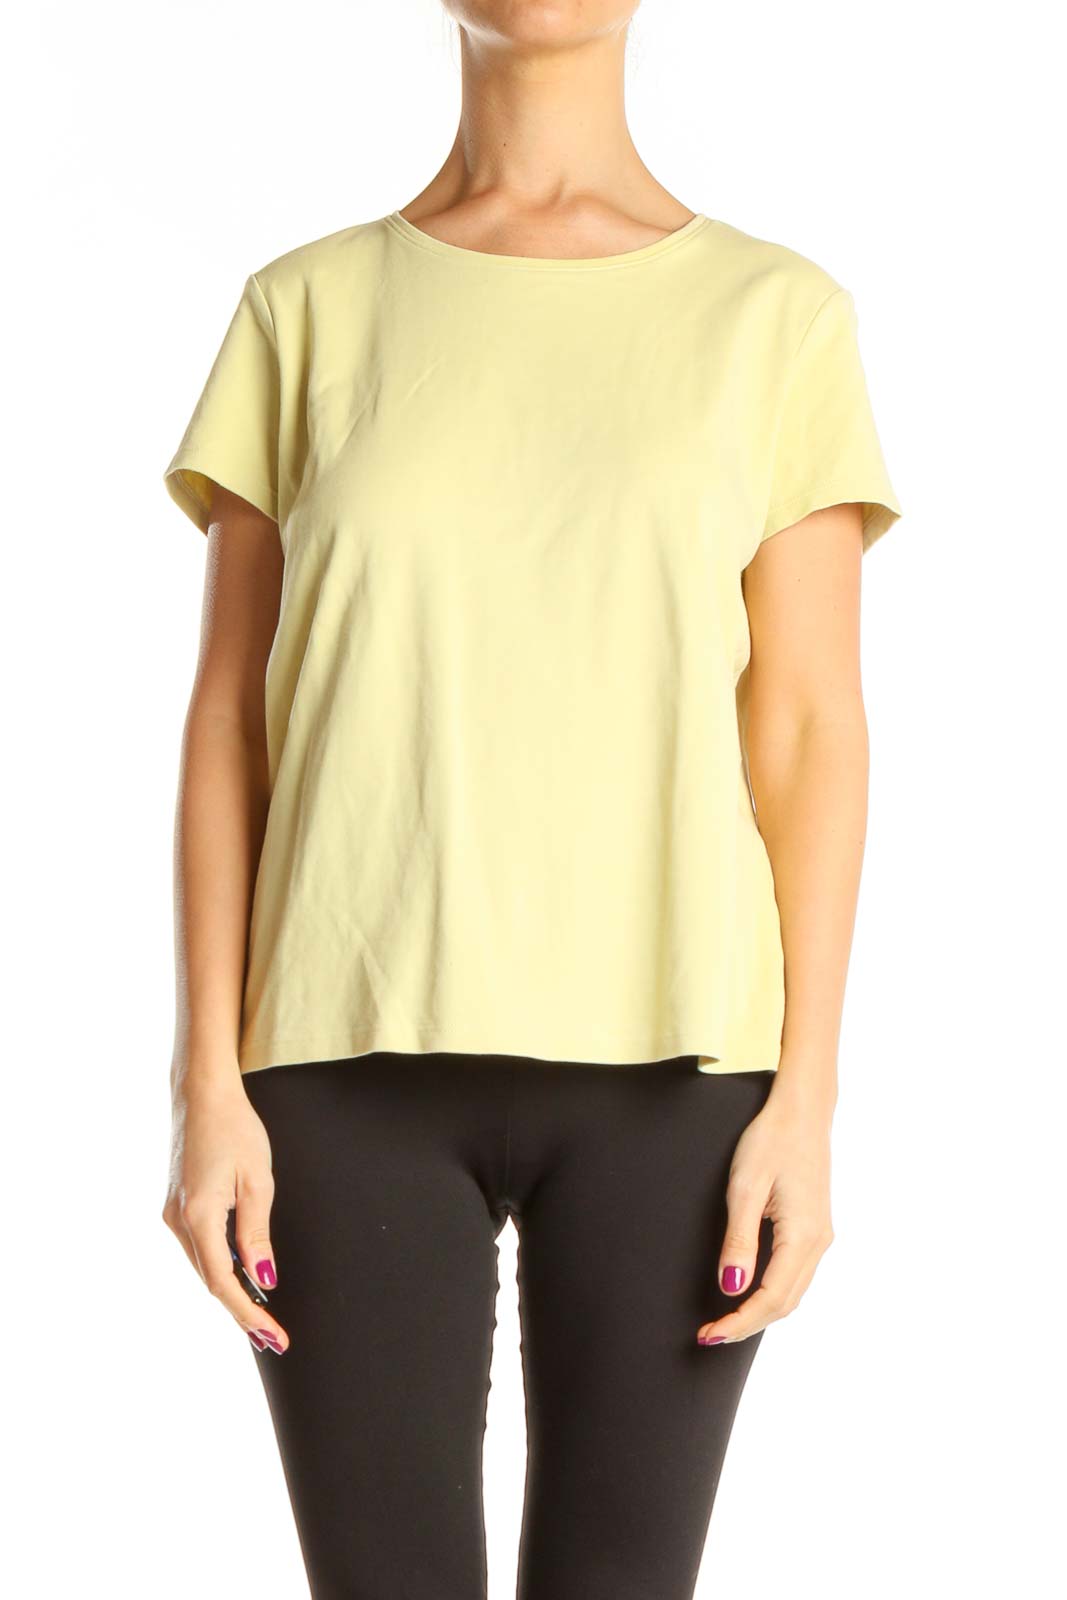 Yellow All Day Wear Top Front